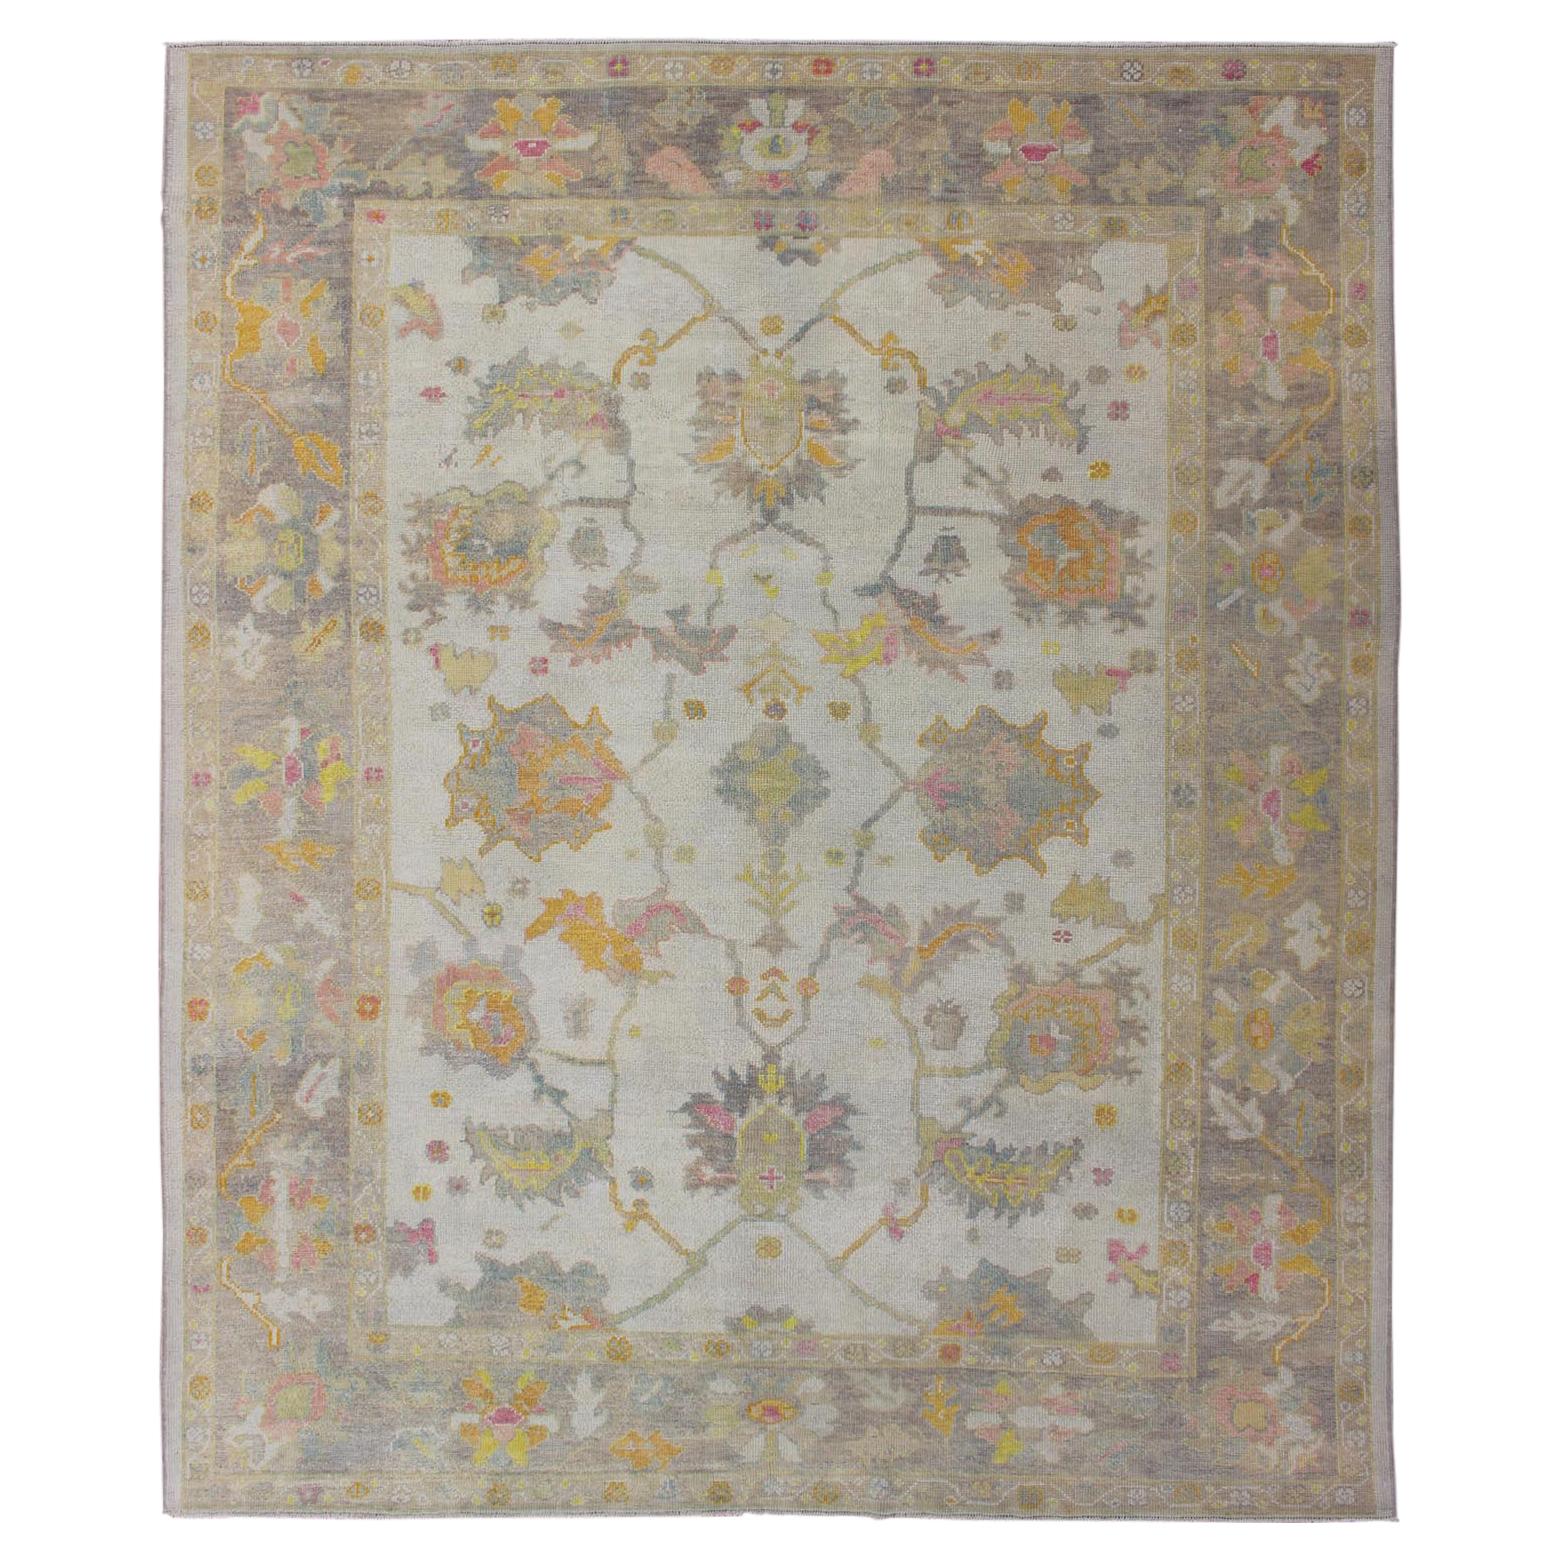 Turkish Oushak Rug with Muted Color Palette and All-Over Flower Design